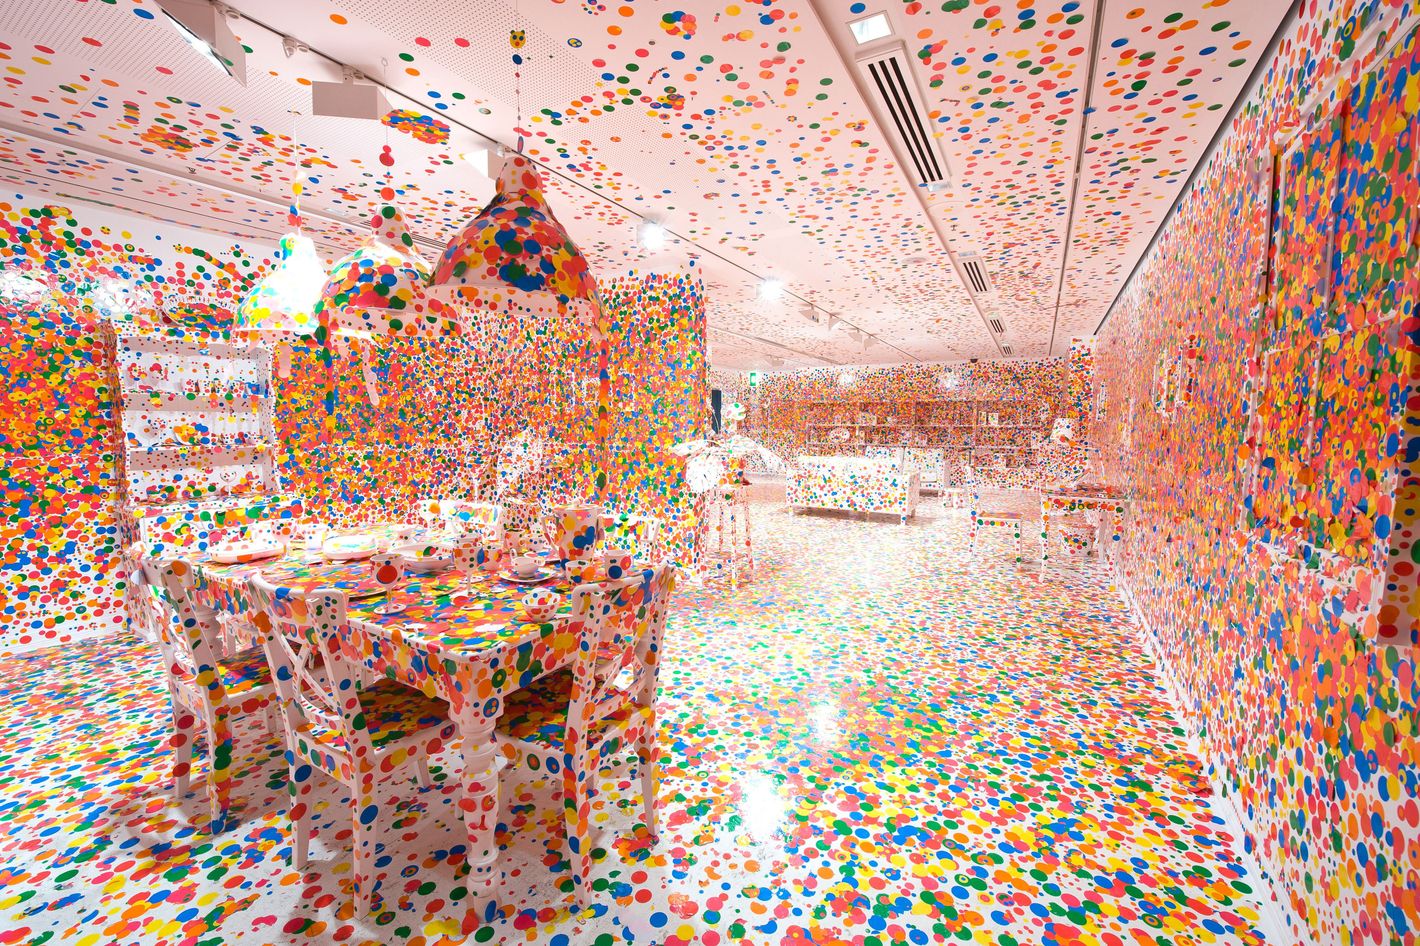 Yayoi Kusama: Kusama Infinity - It sure would be fun if Yayoi Kusama ran  everything, and buildings looked like this! FYI - this image is Louis  Vuitton's Fifth Avenue building as it